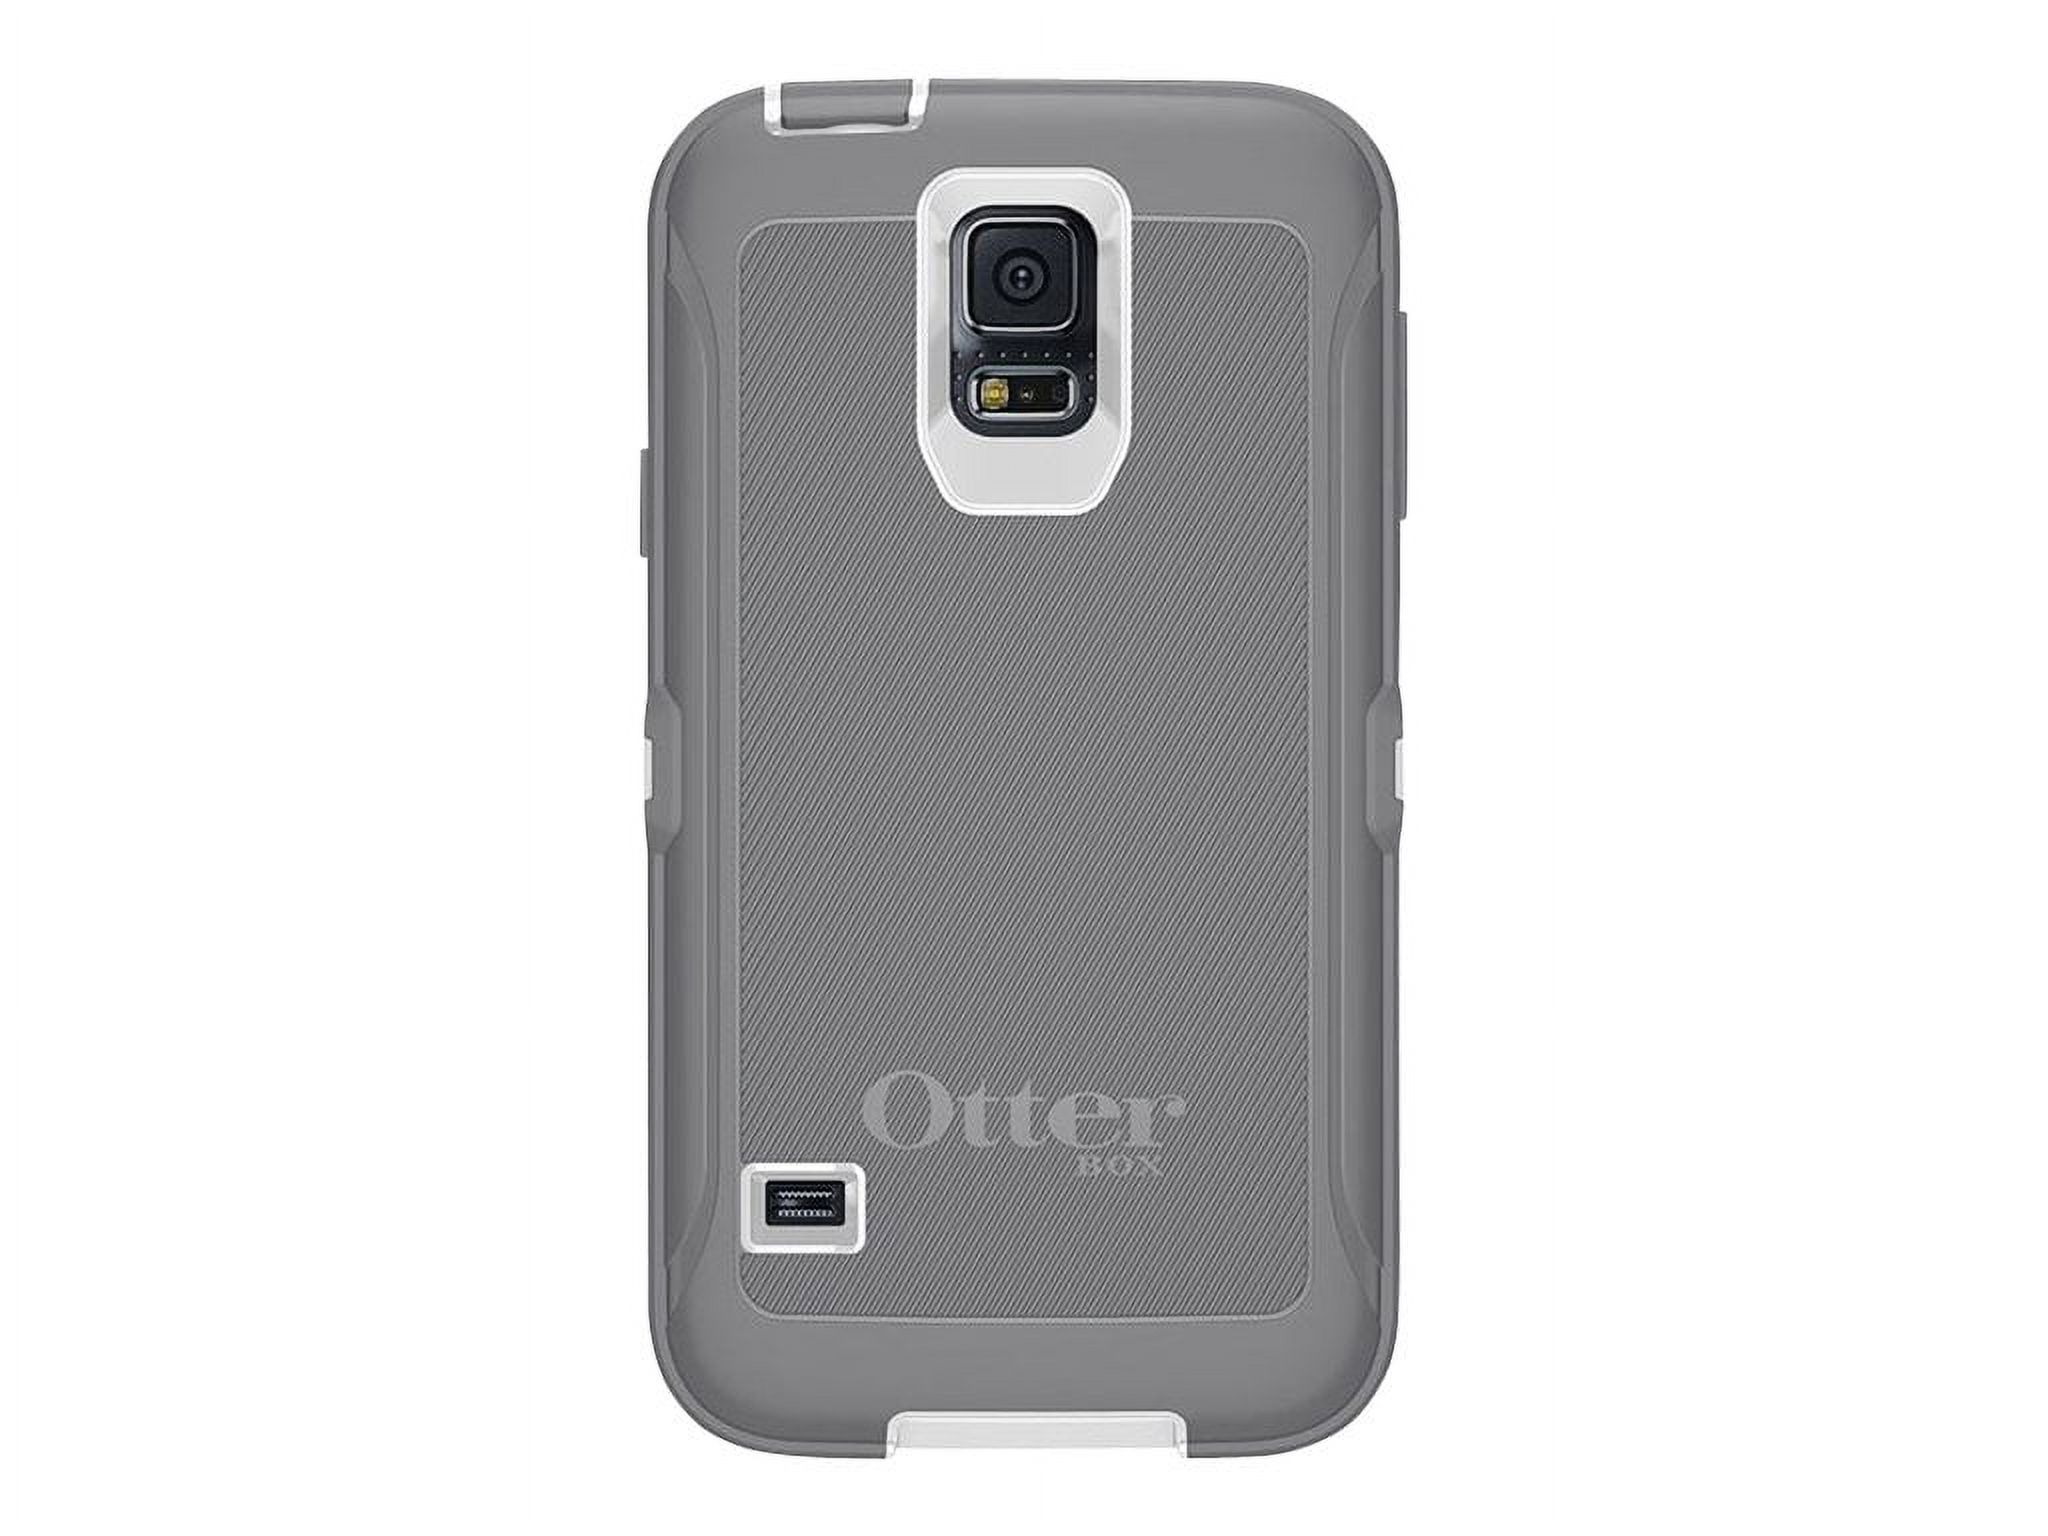 OtterBox Defender Series Samsung Galaxy S5 - Back cover for cell phone - silicone, polycarbonate, synthetic rubber - white, gunmetal gray - for Samsung Galaxy S5 - image 1 of 7